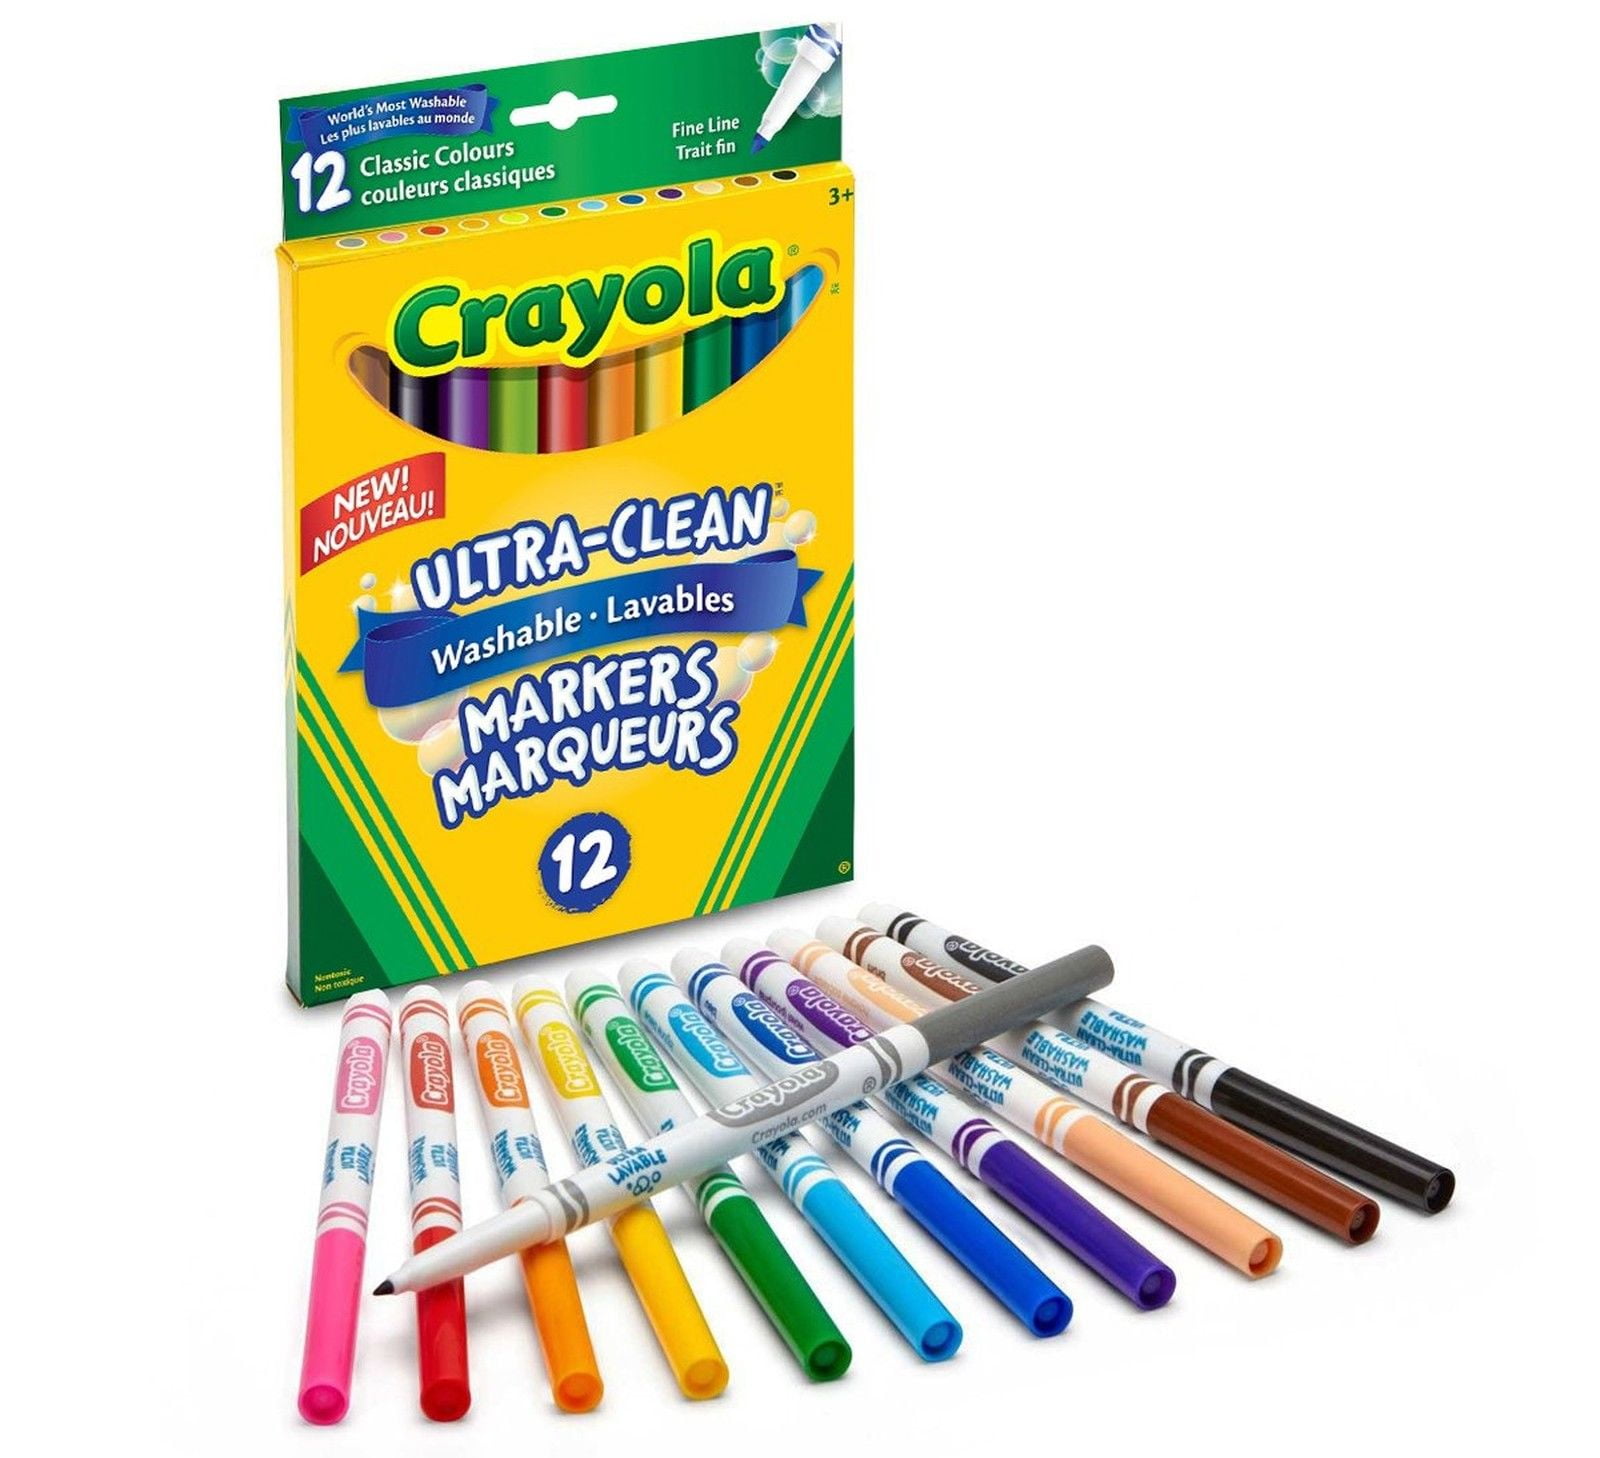 Crayola Adult Colored Pencil Set (100ct), Premium Coloring Pencils For  Adult Coloring Books, Holiday Gift for Teens & Adults, Stocking Stuffer